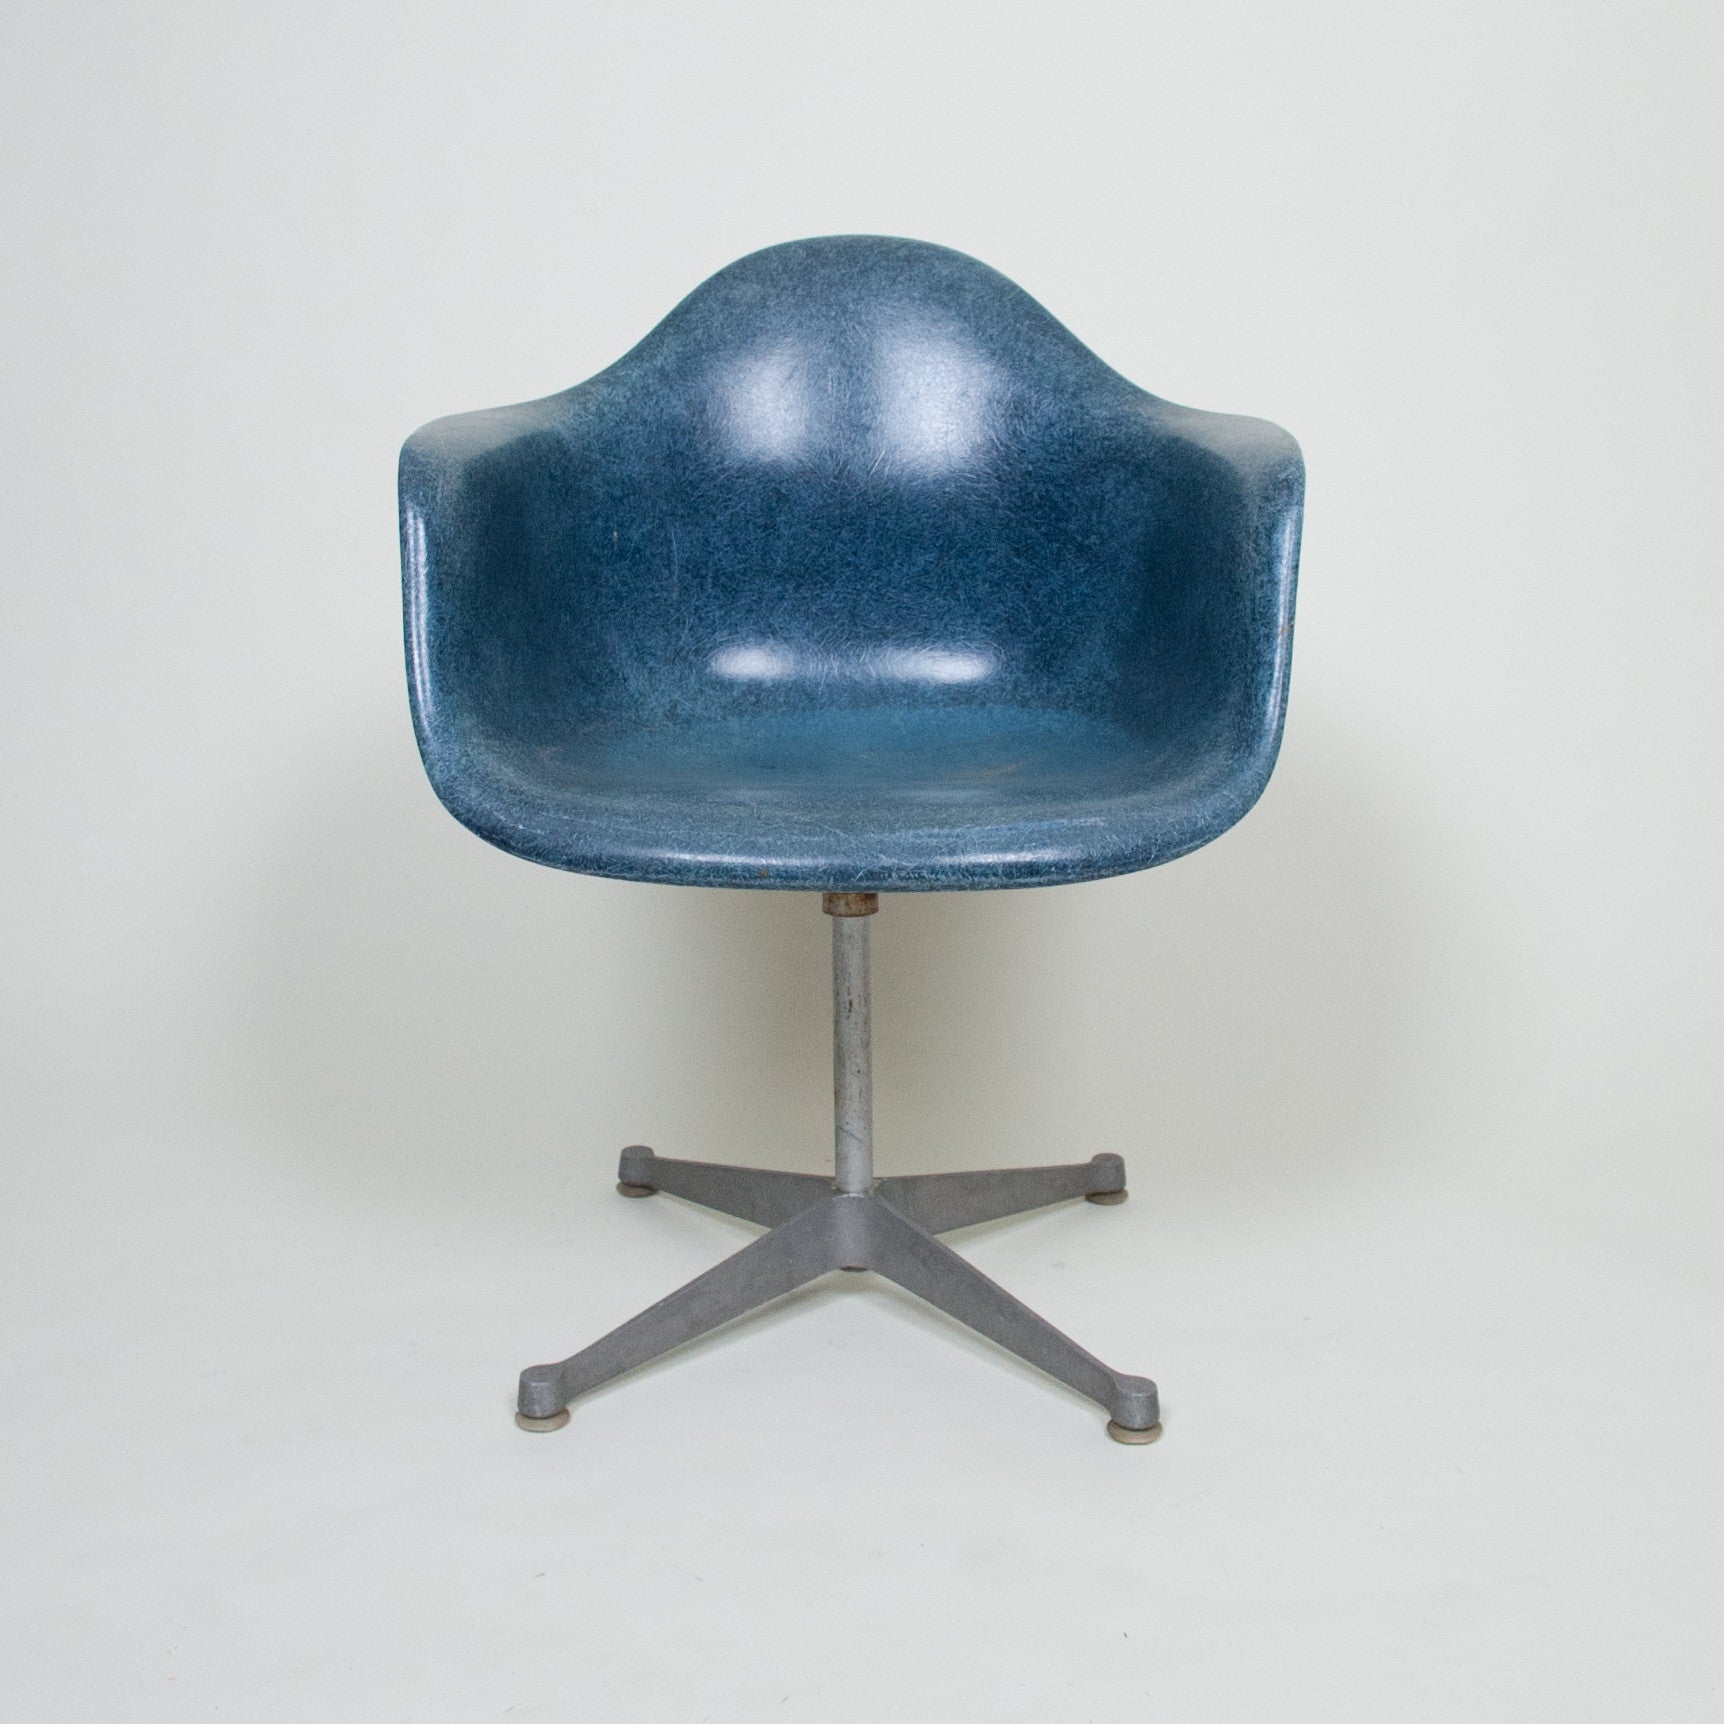 SOLD Rare Vintage Herman Miller Eames Navy Blue Fiberglass Armshell Chairs 5 Available